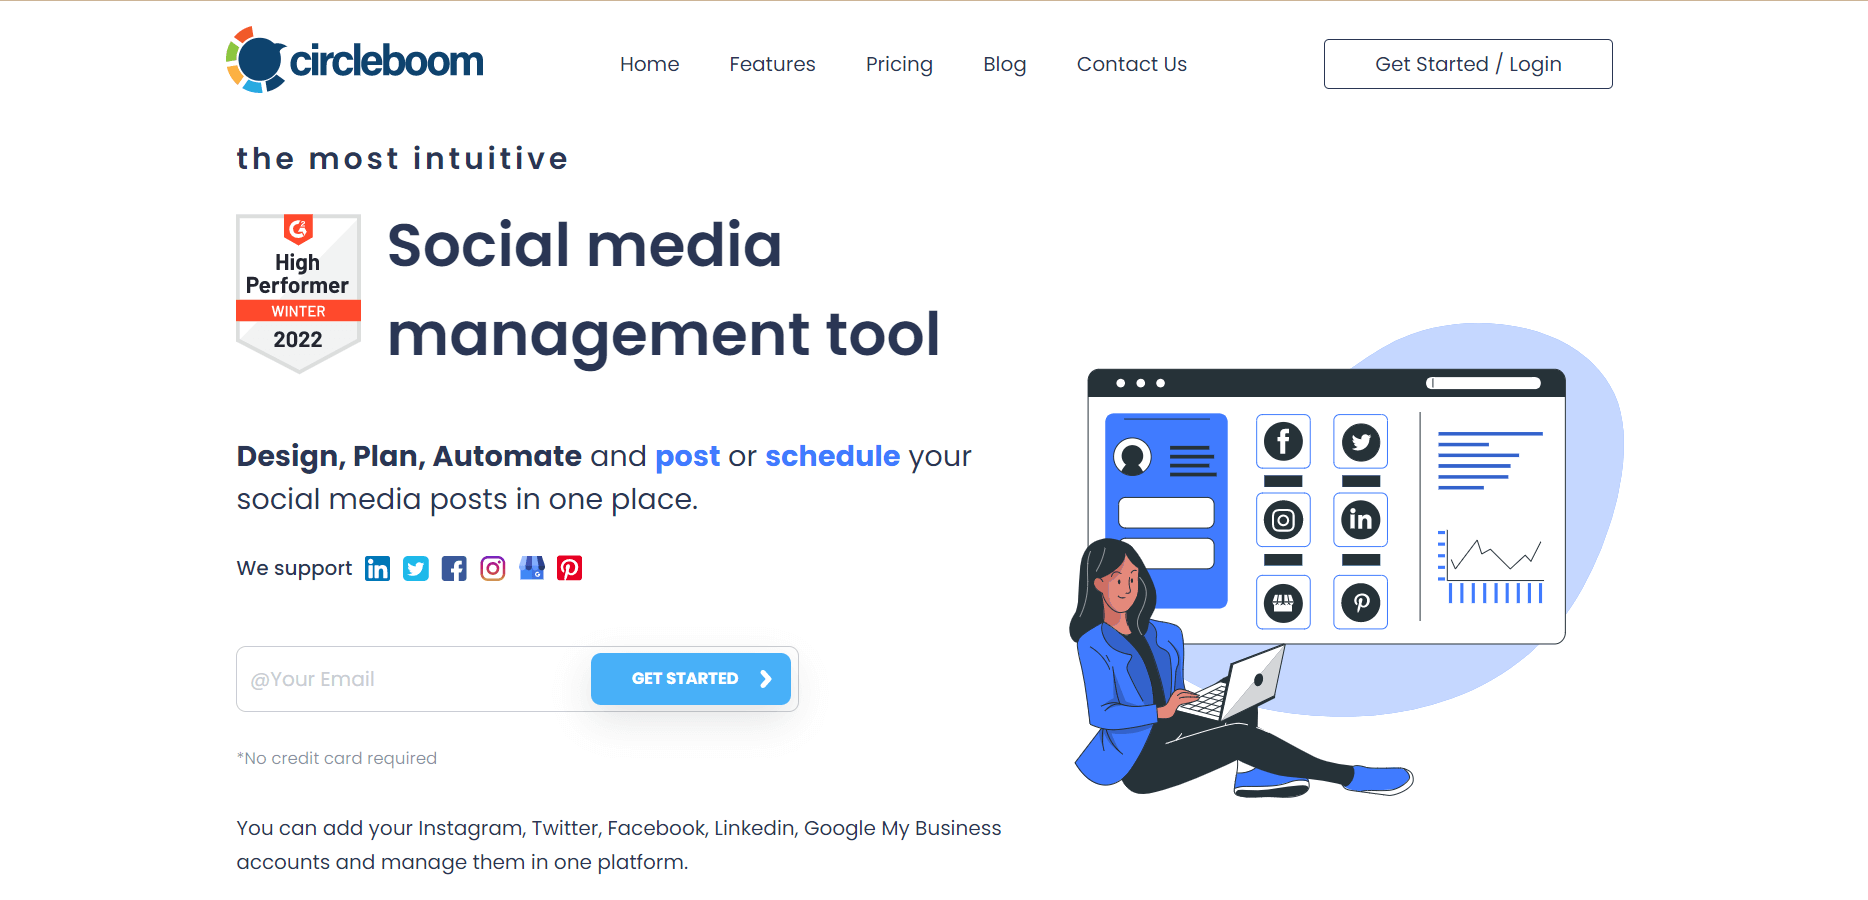 Instagram Scheduling Tool of Circleboom helps manage and glow your social media visibility